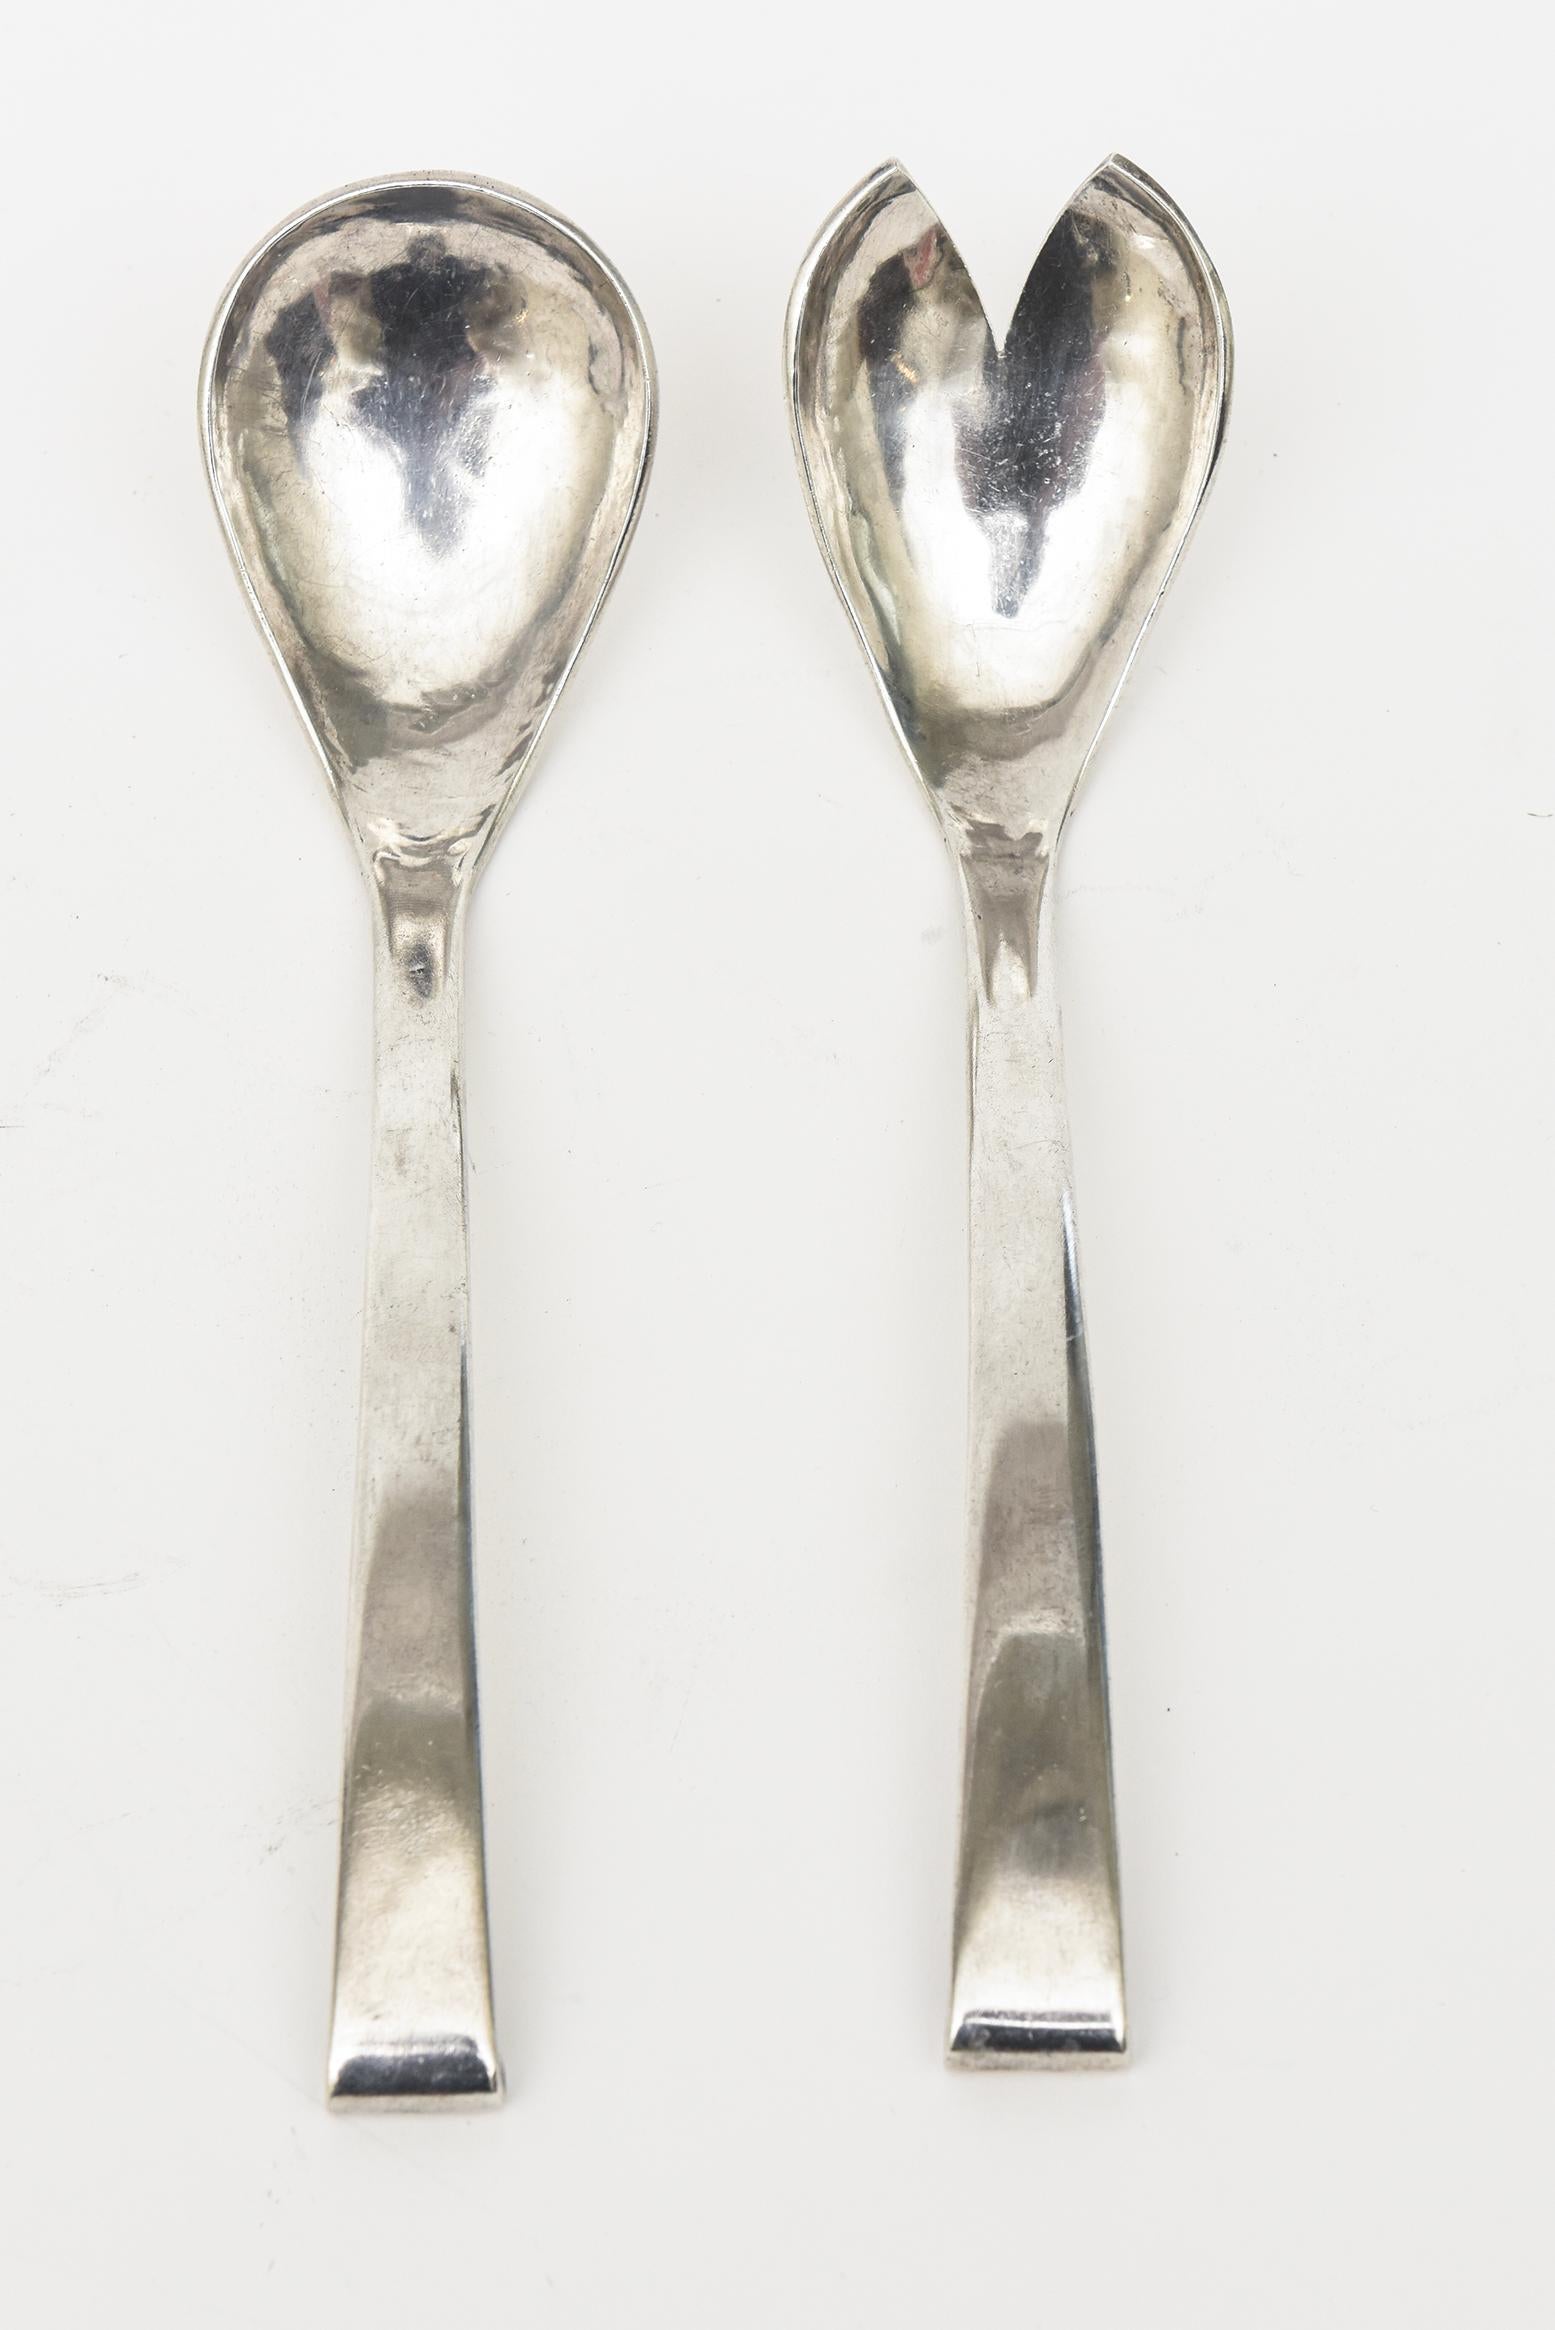 This pair of vintage sterling silver hallmarked salad servers or serving pieces are very modernist in design. They were made in Peru from the time. They have a curved bend and give it height as the fork and spoon. The hallmarks are 